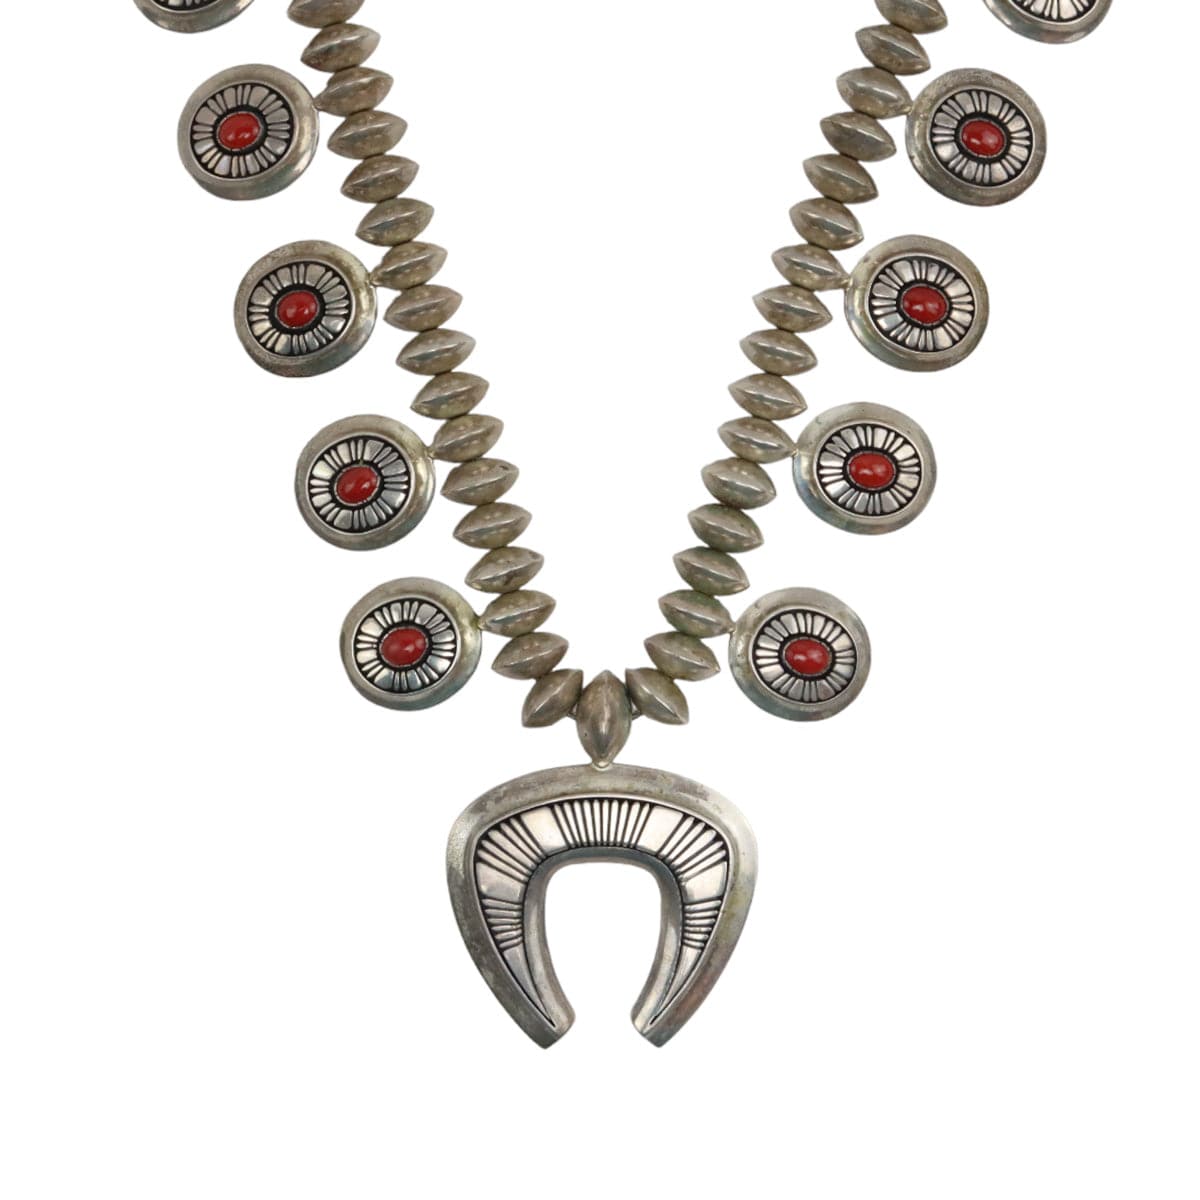 Alfred Joe (b. 1950) - Navajo Coral and Silver Overlay Squash Blossom Necklace and Post Earrings Set c. 2005 (J15358-CO-027) 2